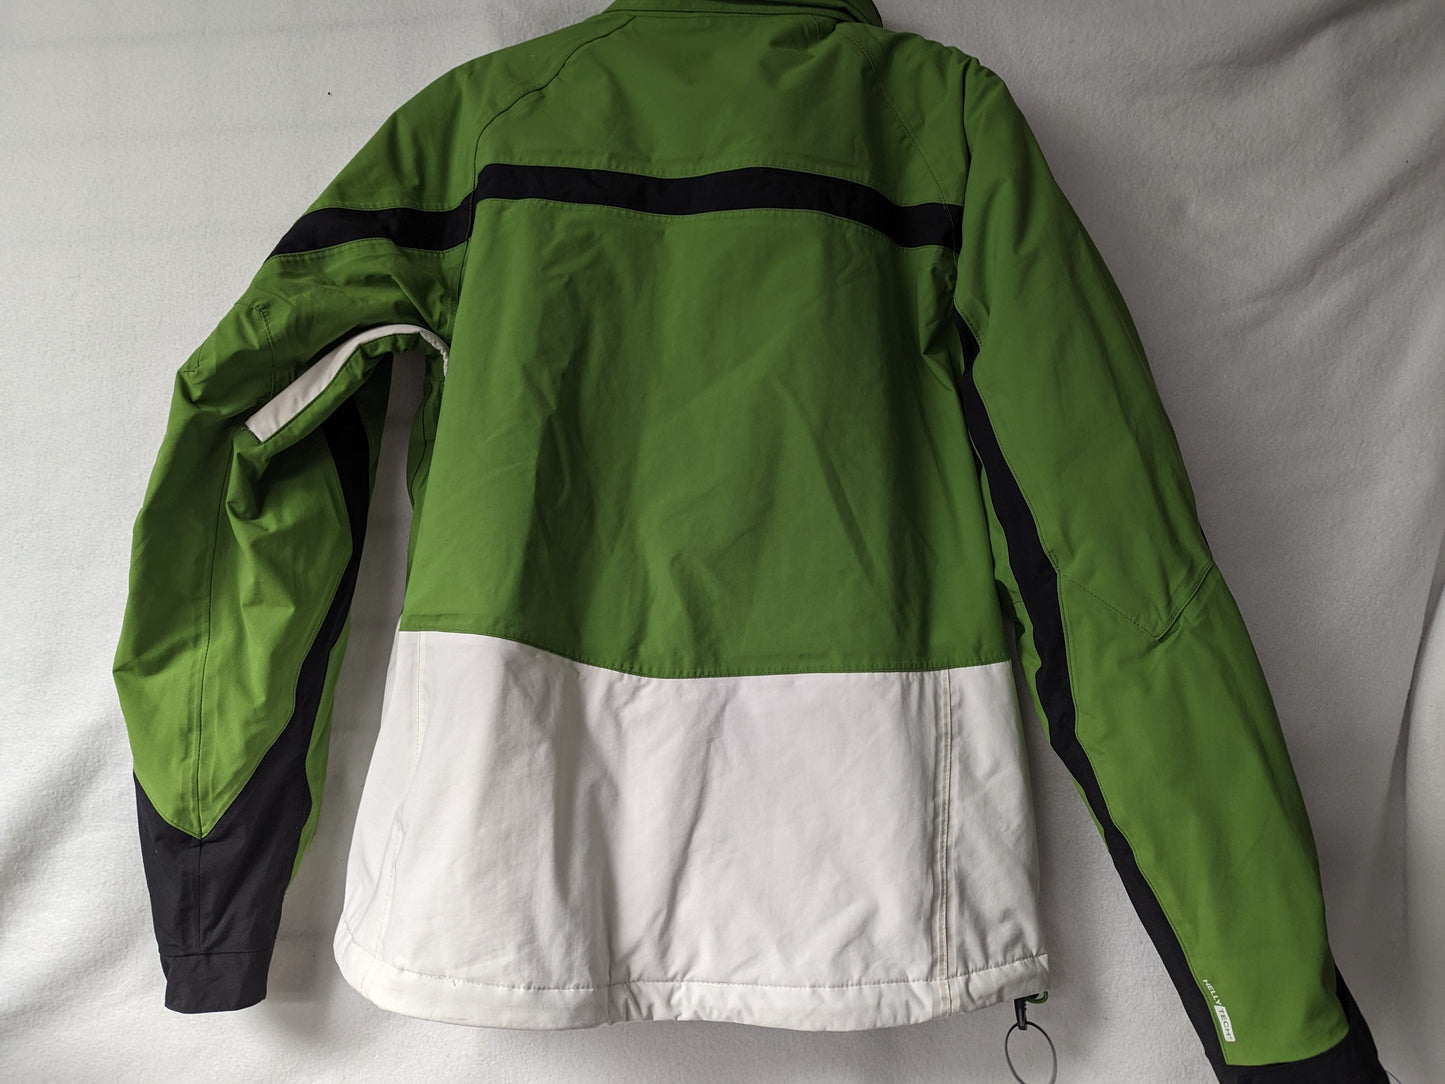 Helly Hansen Ski/Snowboard Jacket Coat Size Extra Small Color Green Condition Used